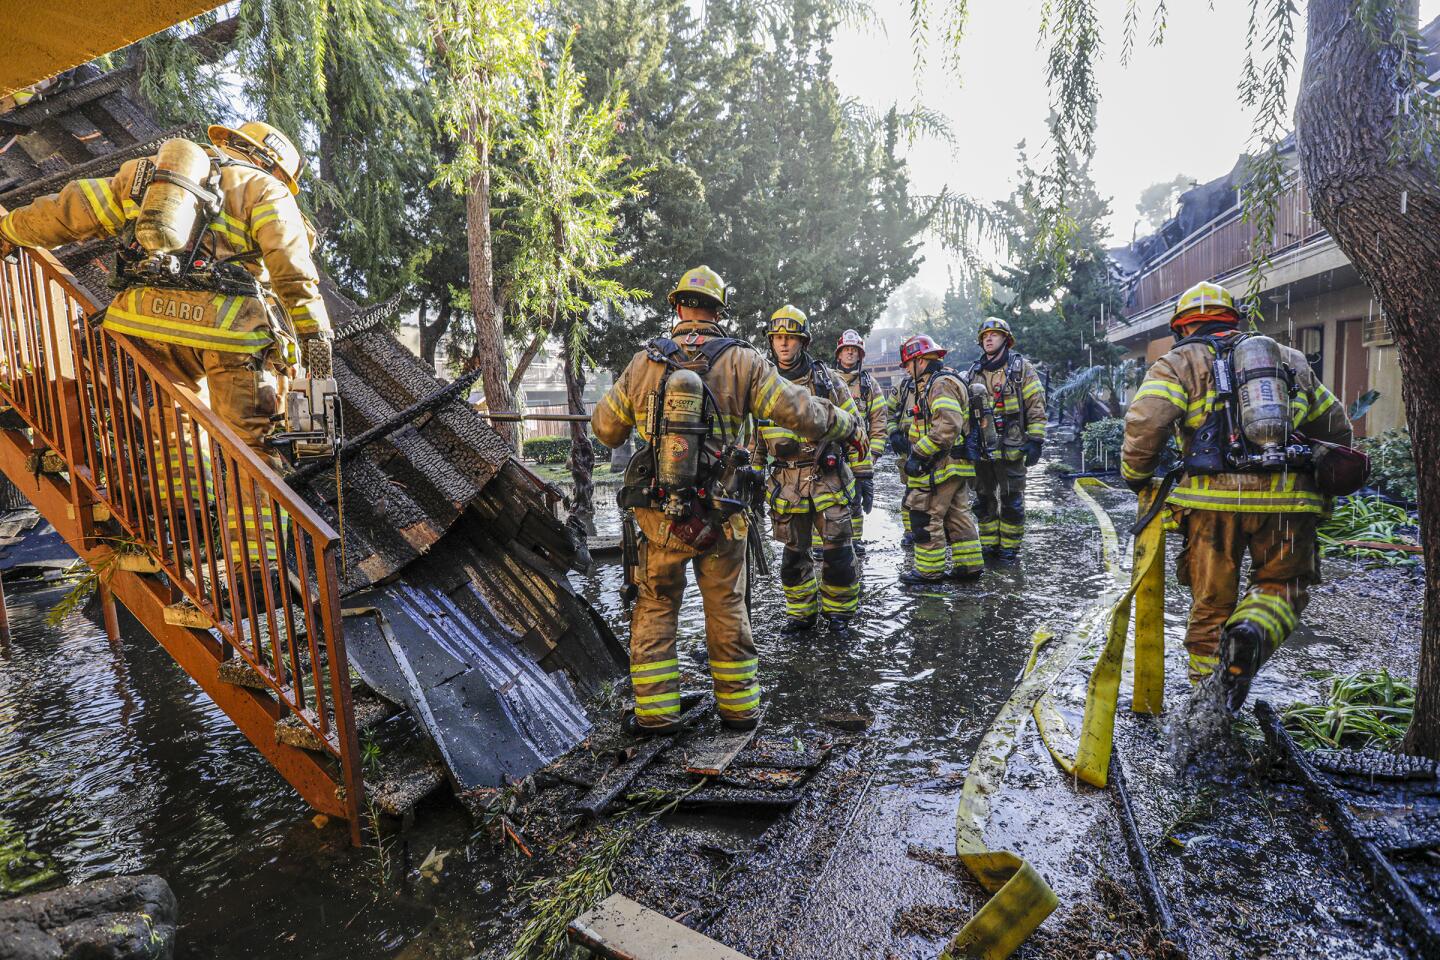 TUSTIN, CA - FEBRUARY 12 , 2020 - A five-alarm fire that caused the roof of a building in a two-story apartment complex in Tustin to collapse today left two residents injured, and firefighters were working to douse hot spots and determine if anyone was unaccounted for. The fire was first reported at 3:01 a.m. at 15751 Williams Street, near McFadden Avenue, according to the Orange County Fire Authority. (Irfan Khan / Los Angeles Times)